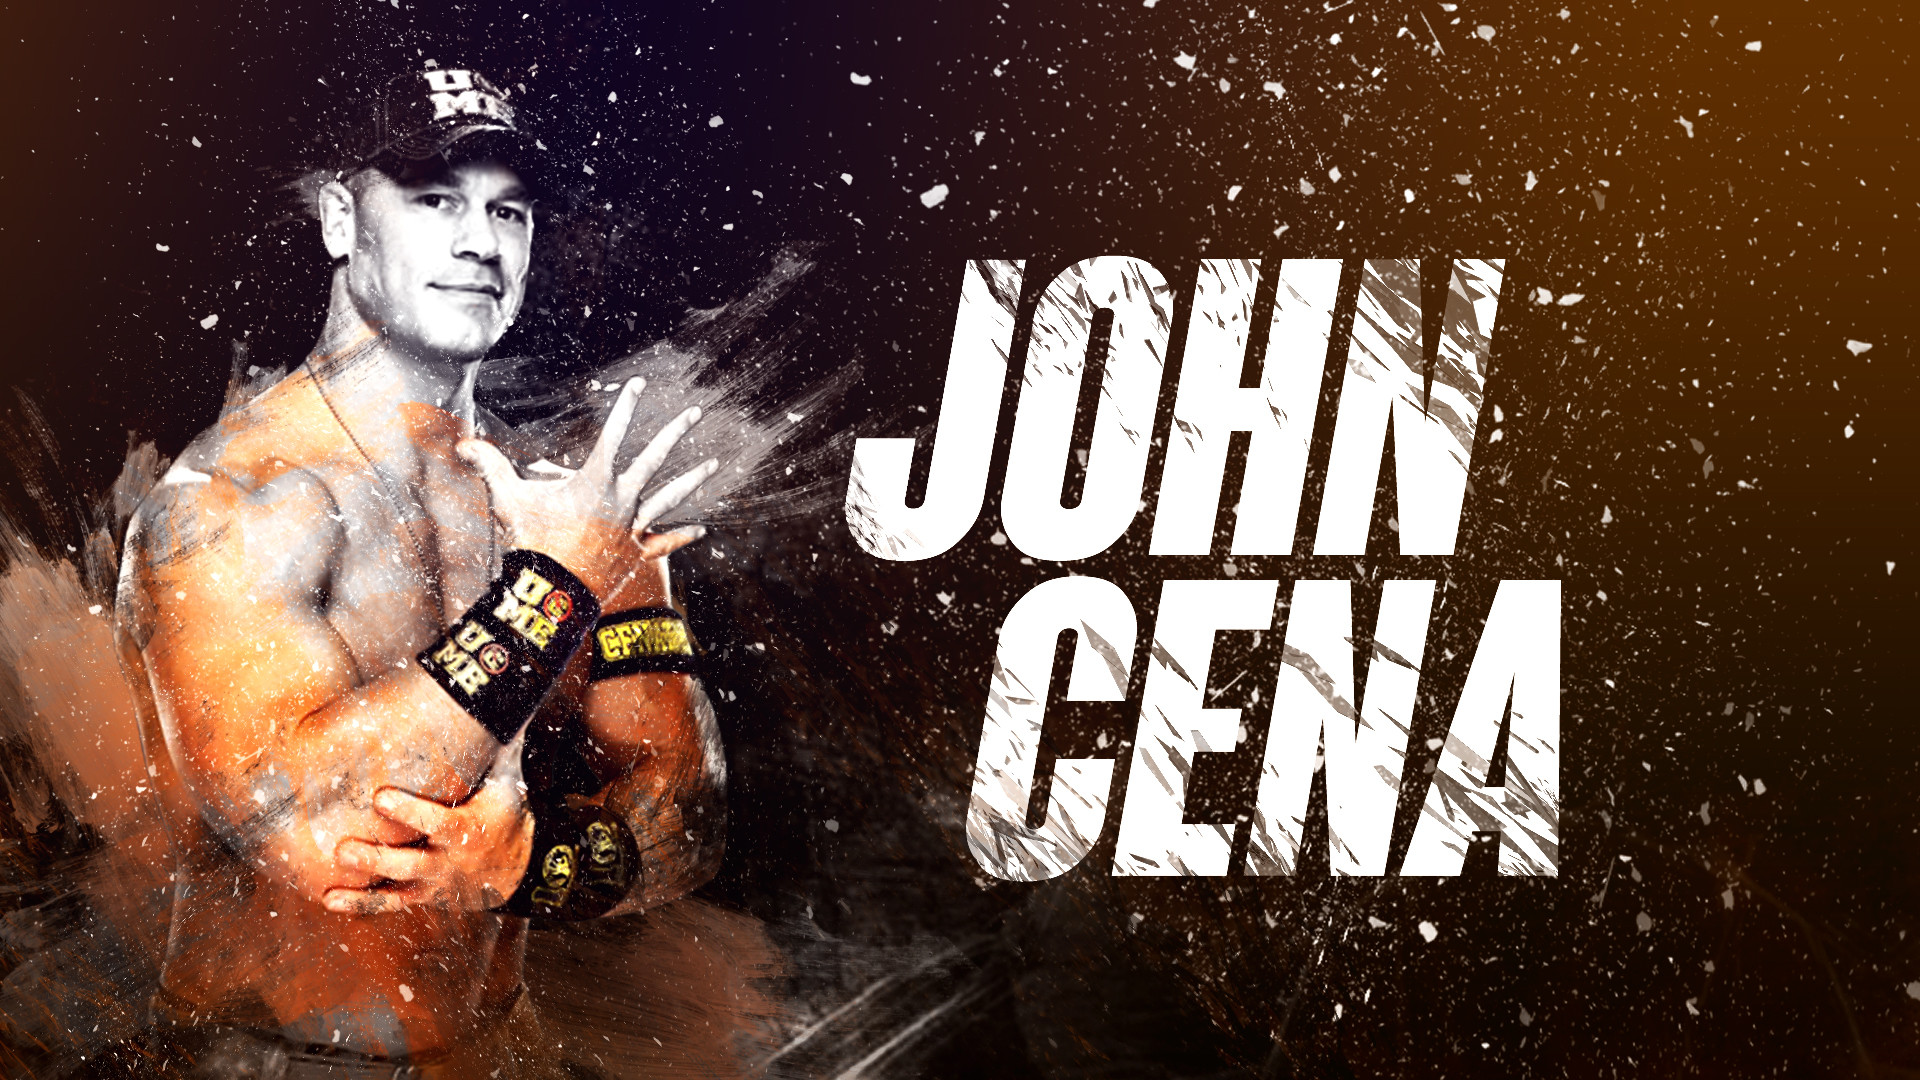 1920x1080 You can download high-resolution images here. John Cena wallpaper ...